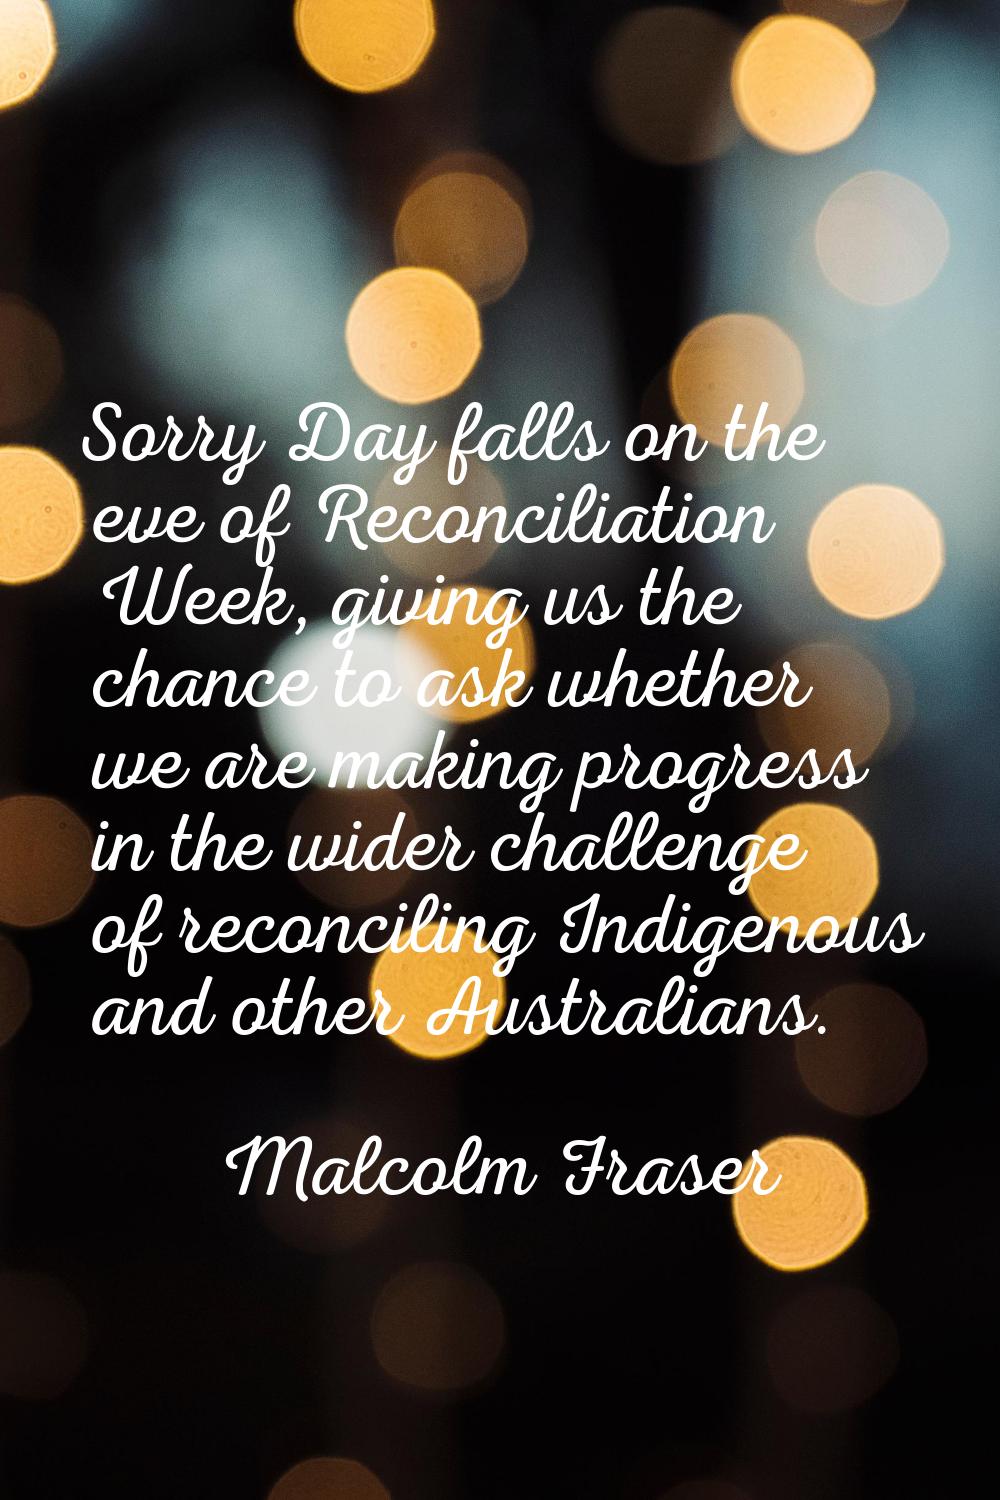 Sorry Day falls on the eve of Reconciliation Week, giving us the chance to ask whether we are makin